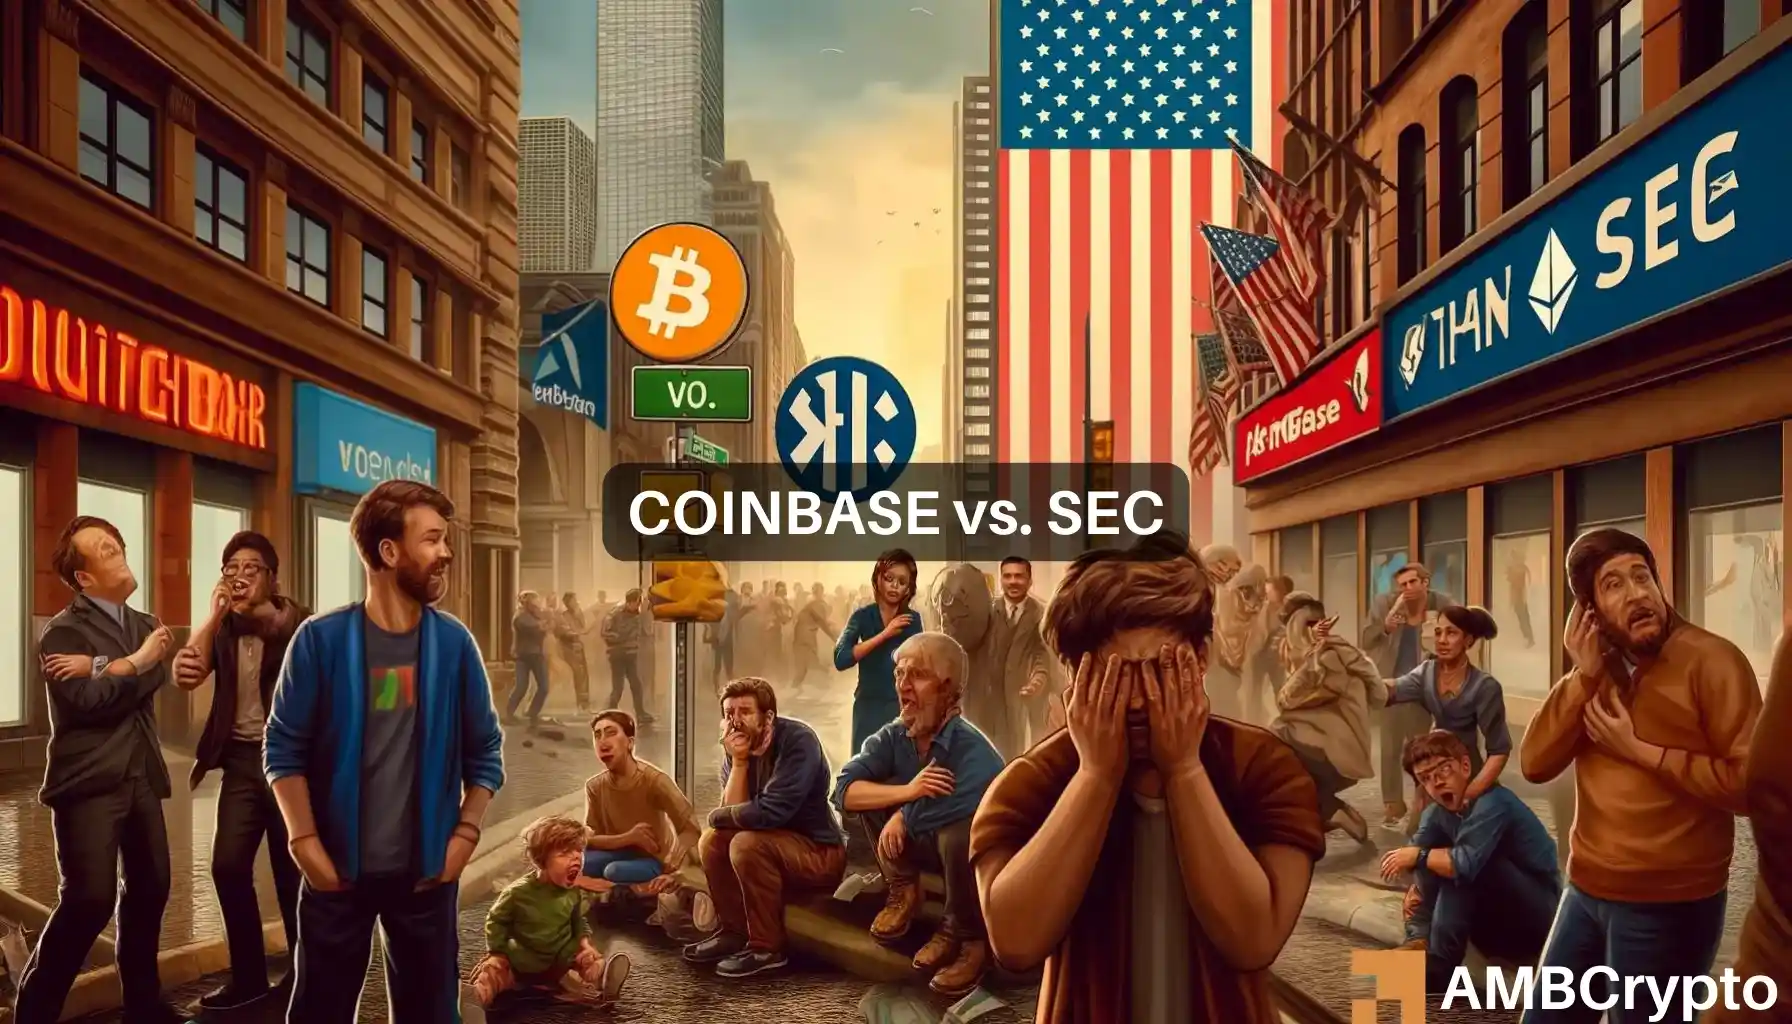 Coinbase slams SEC for ‘choking’ crypto industry – What now?